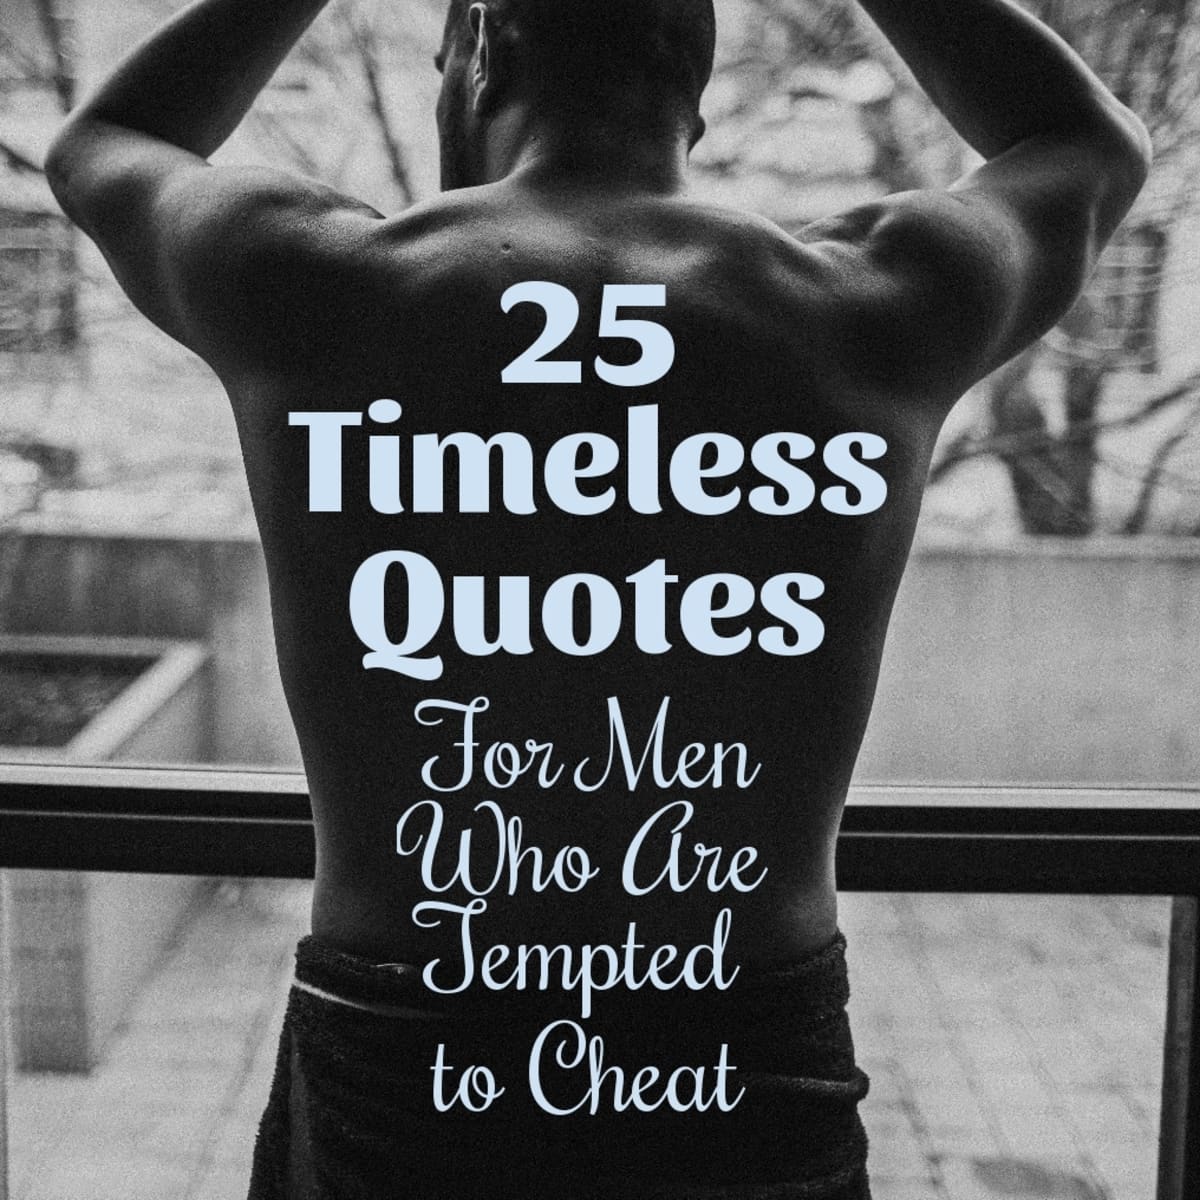 25 Timeless Quotes for Men Tempted to Cheat - PairedLife